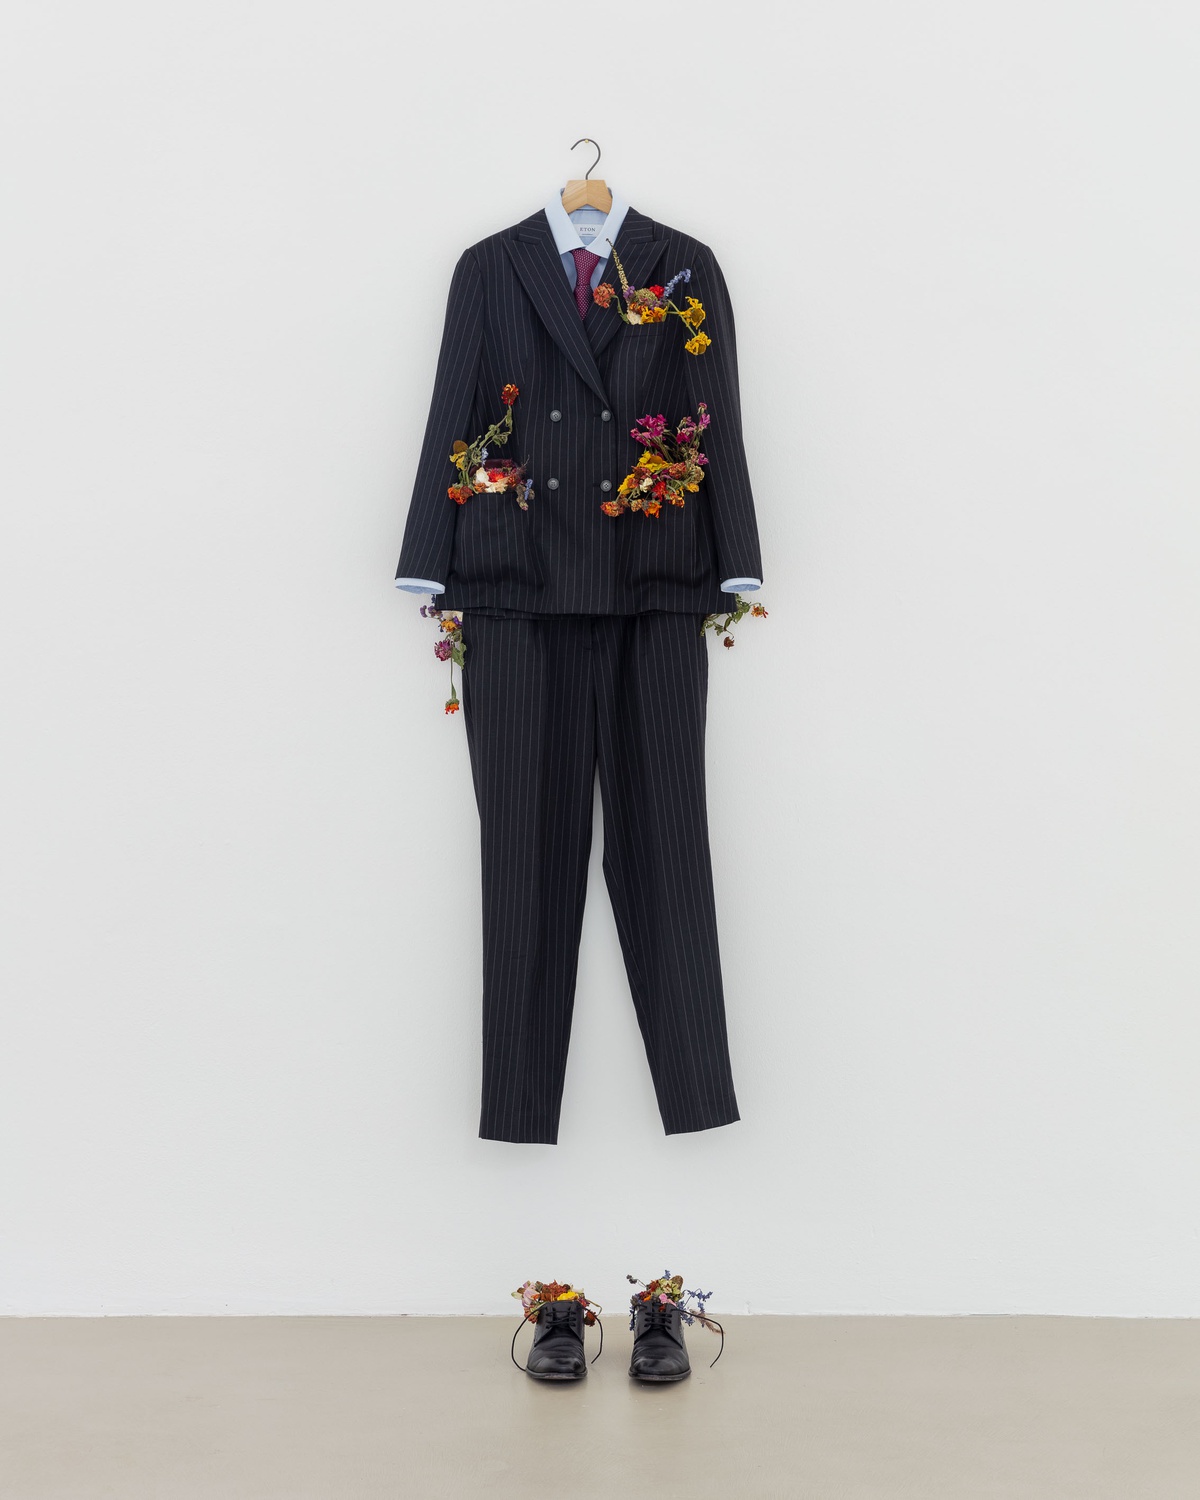 Angharad Williams, My first Suit, 2020custom suit, shirt, tie, shoes, stolen flowers, C-type print, hangerInstallation view from the group exhibition Not Working, 2020, Kunstverein München, Munich, Germany